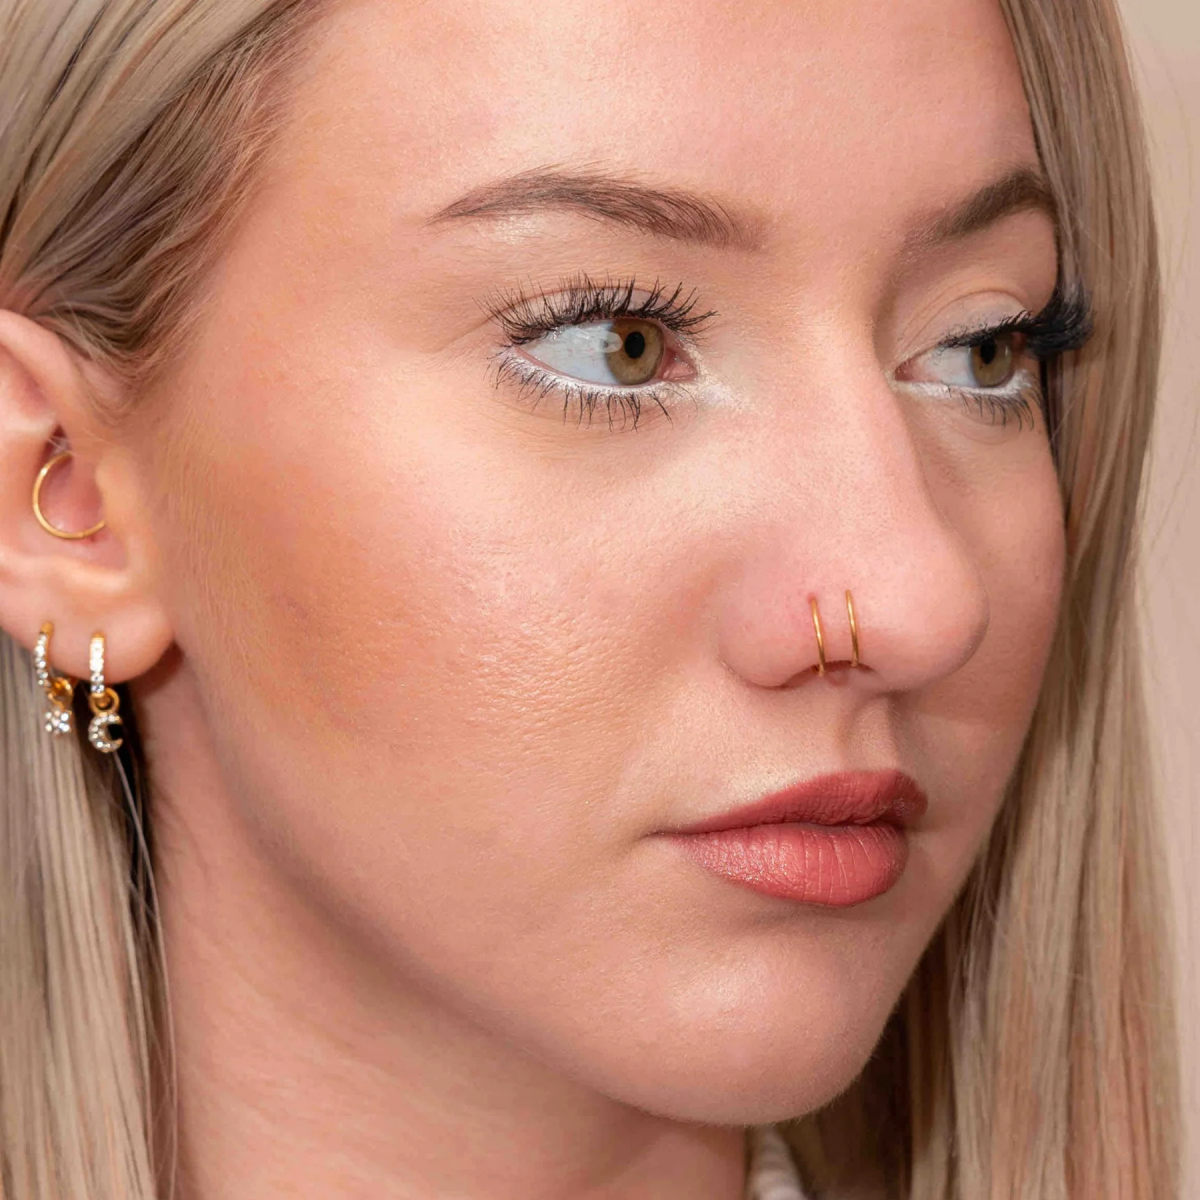 double nose piercing one side.jpg